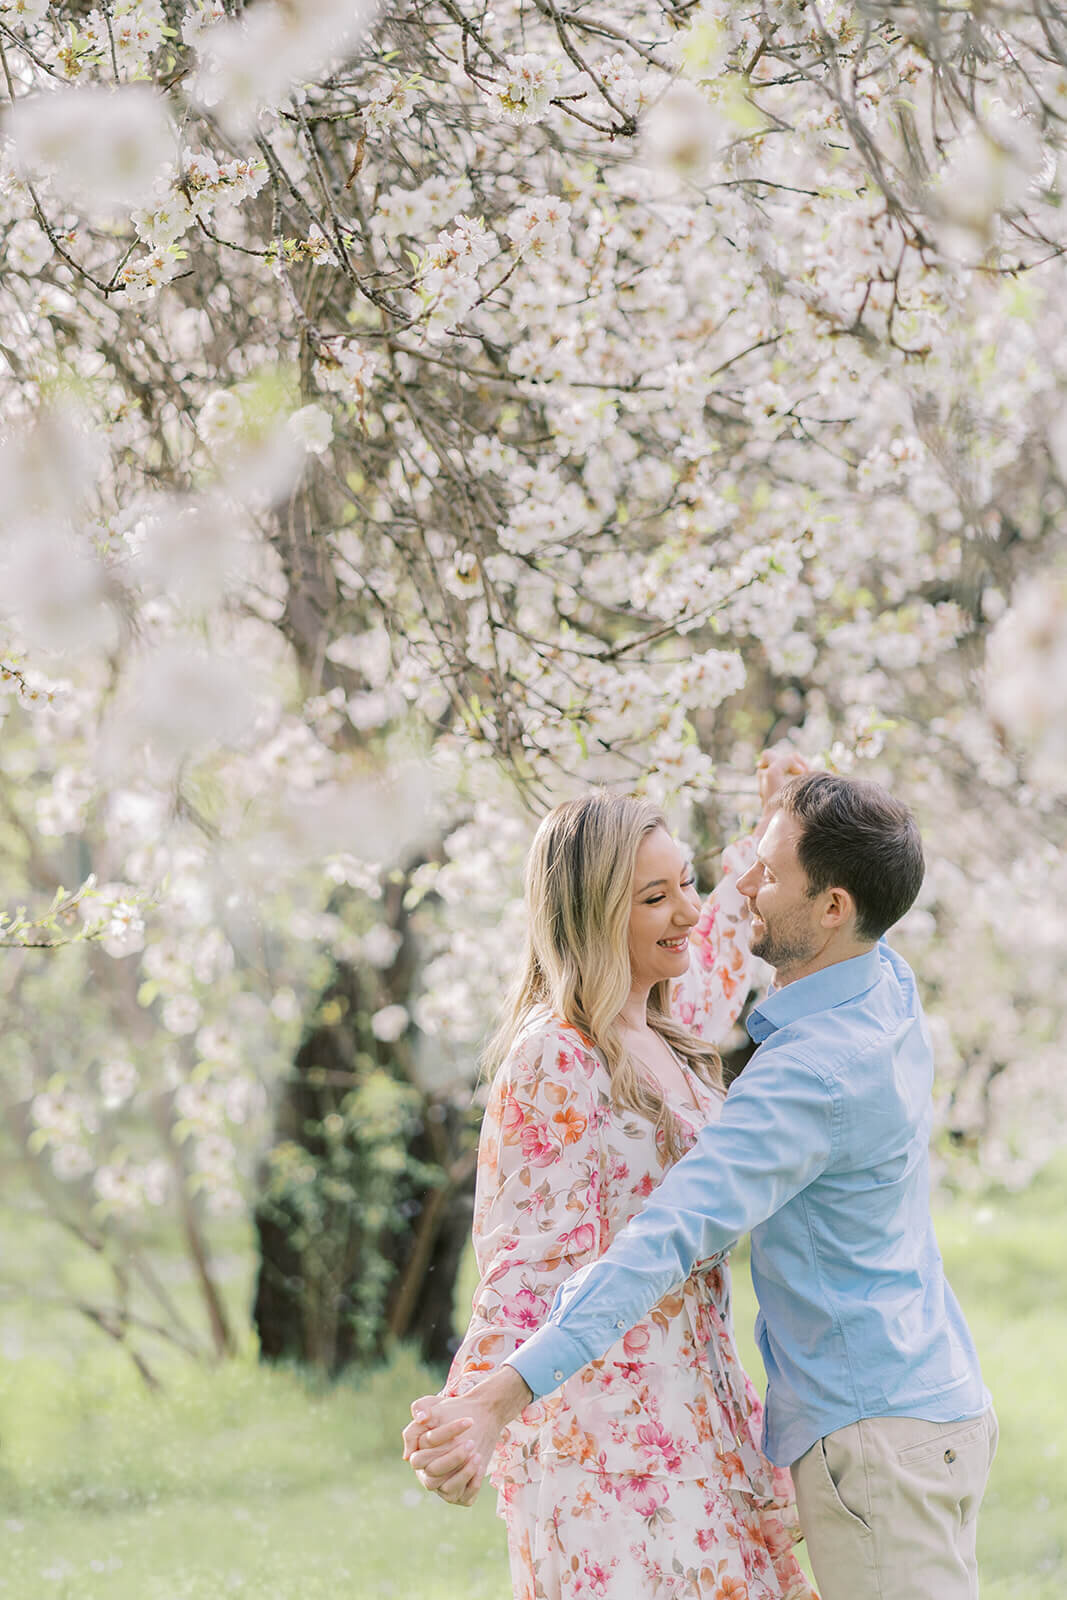 ransform moments into memories with our captivating almond blossom couples' photoshoot in Adelaide.